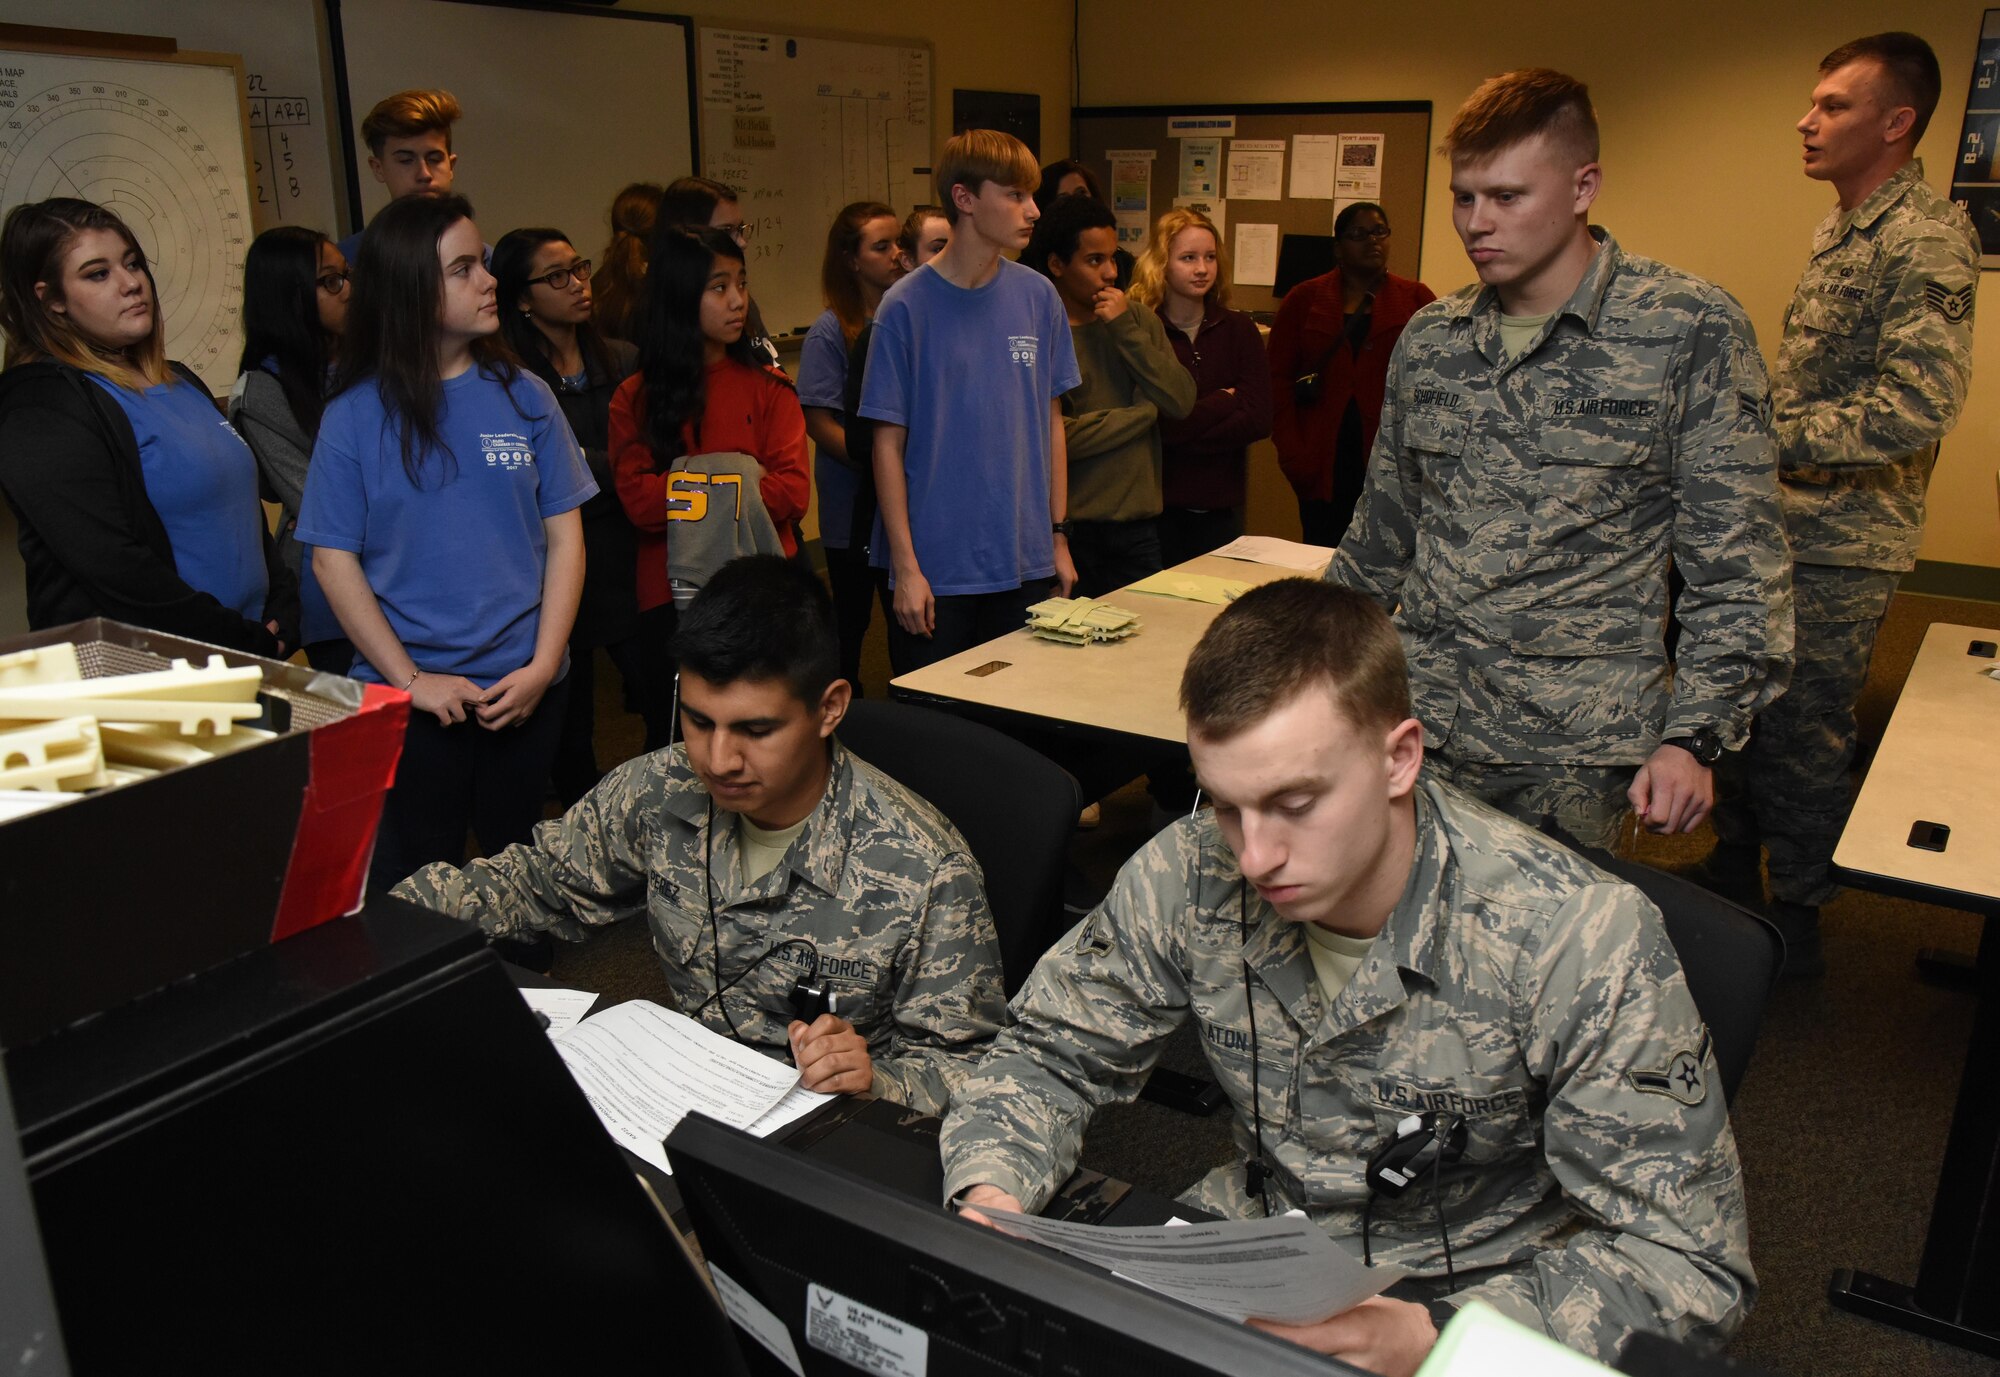 Local high school freshmen receive a 334th Training Squadron air traffic control course overview at Cody Hall during the Biloxi Chamber of Commerce Gulf Coast Junior Leadership Tour Jan. 24, 2017, on Keesler Air Force Base, Miss. The group’s objective is to produce students of outstanding character, while teaching them about community needs and what it takes to become a leader in today’s society. The tour also included a military training leader briefing and a dorm tour. (U.S. Air Force photo by Kemberly Groue)